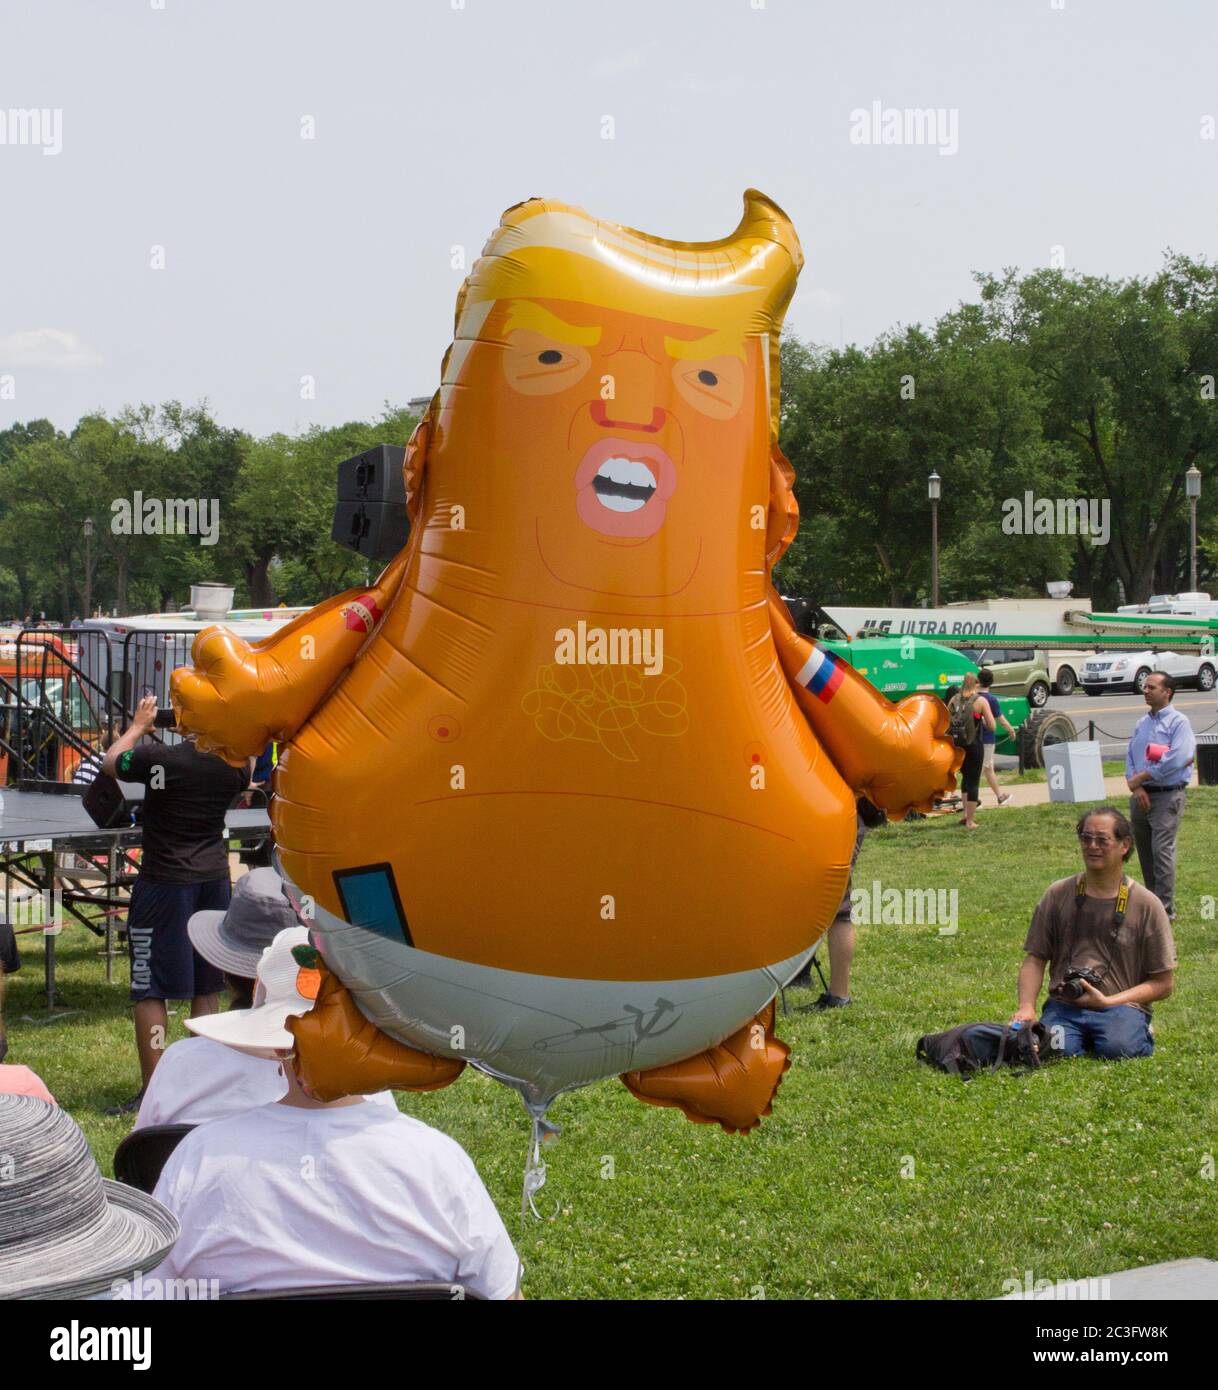 Washington, D.C., USA. 1st June, 2019. Protester's helium balloon depicting a cartoon version of President Donald J. Trump as a baby in diapers with a Russian hammer and sickle emblem on his diaper pin, and a Putin heart tattoo and the tricolors of the Russian flag on his arms, floats above the brimmed hats on participants' heads at the National March To Impeach; a man with a camera around his neck in the background. Organized by the group People Demand Action, the demonstration on the Washington Monument Grounds called for the United States Congress to initiate impeachment. Kay Howell/Alamy Stock Photo